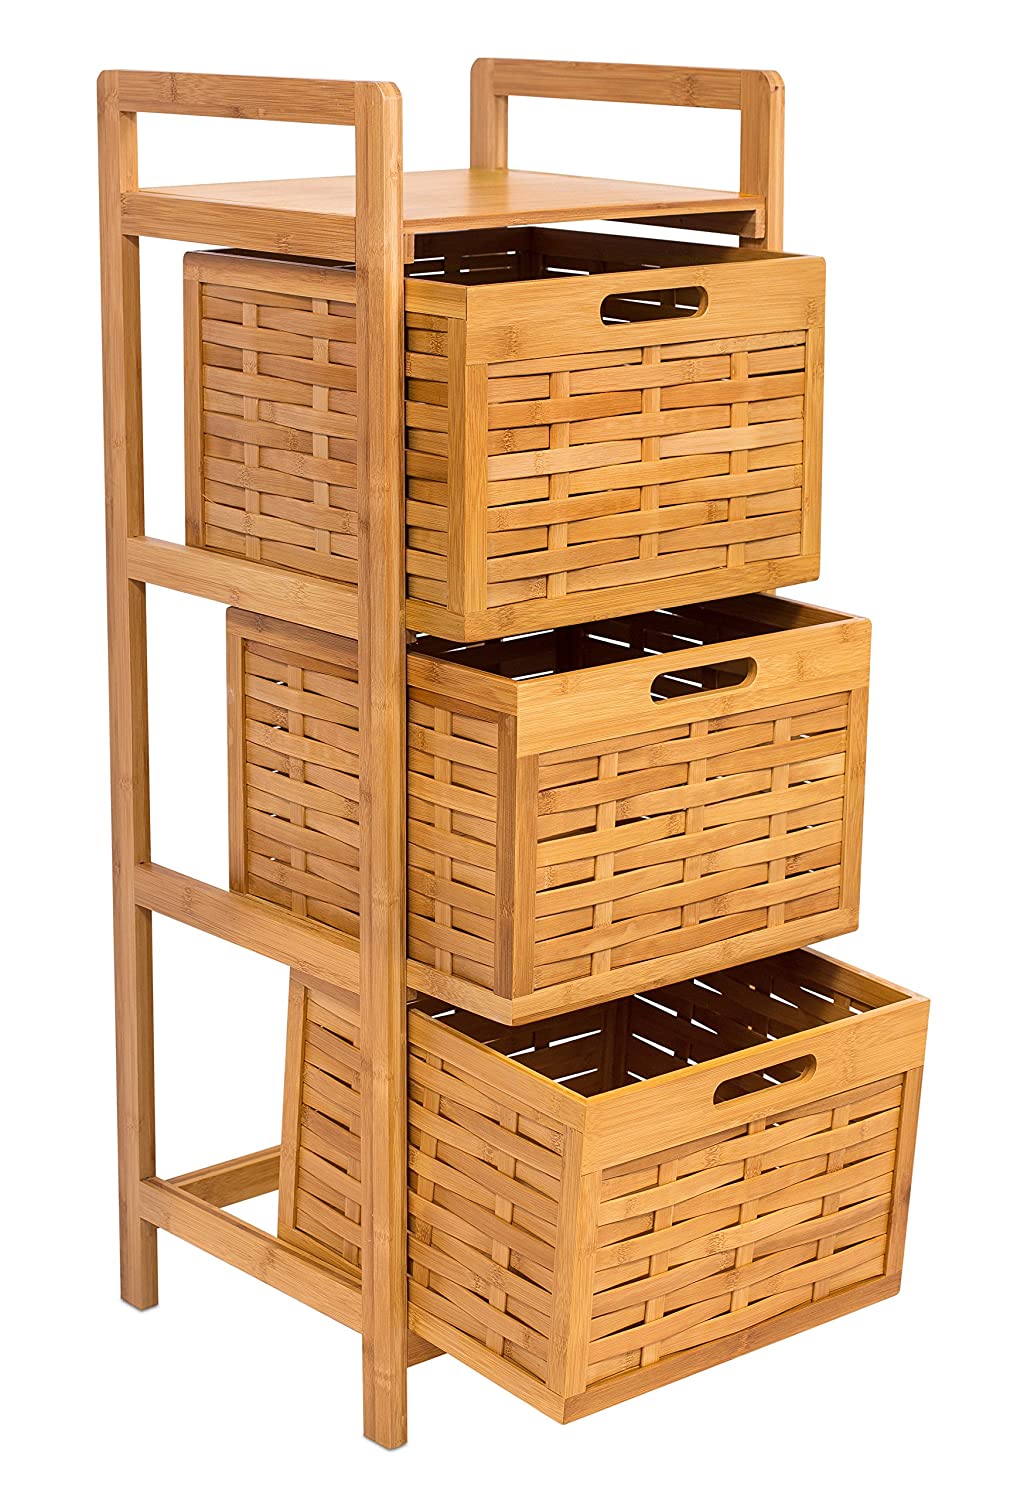 Household Essentials 3-Drawers Natural Wicker Storage Drawer Tower 23.5-in  H x 17.25-in W x 13.25-in D